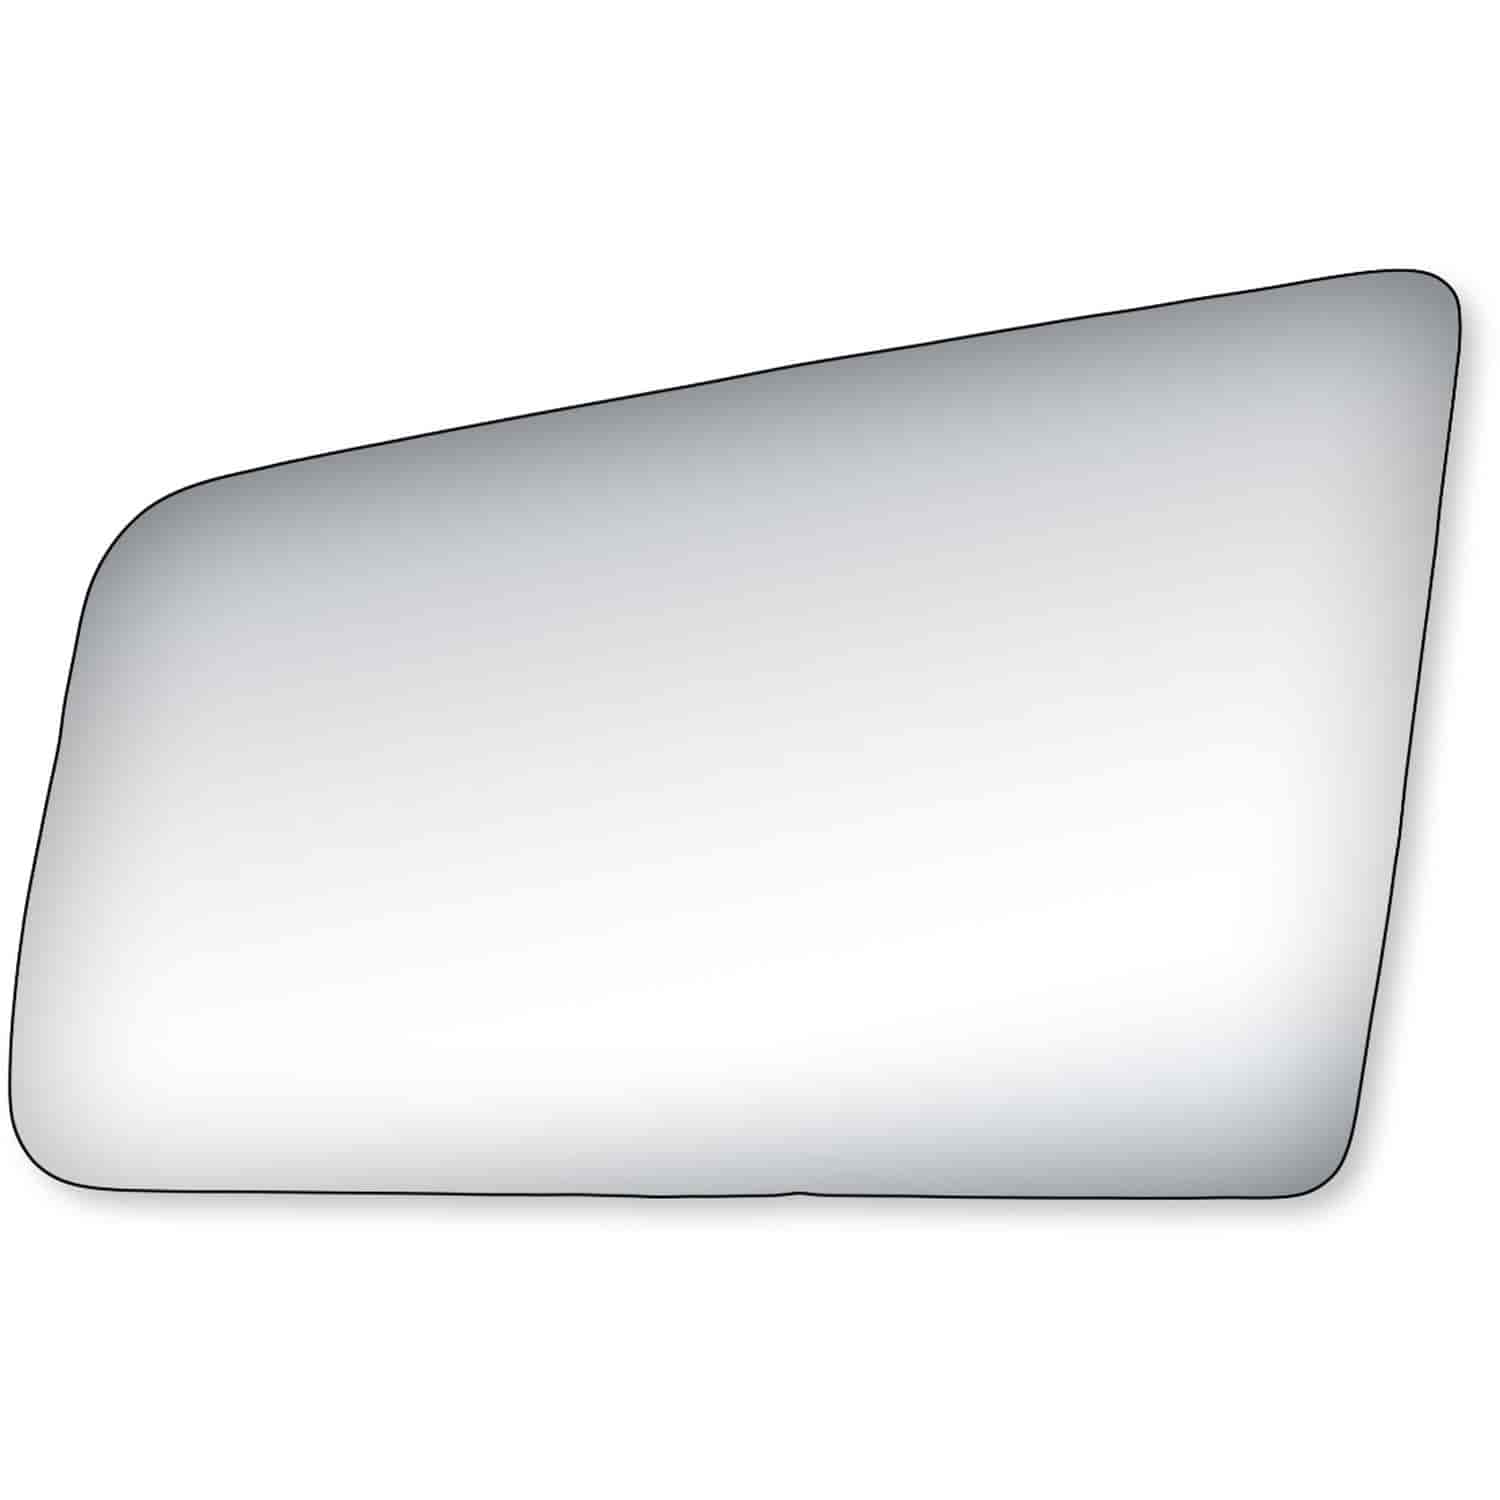 Replacement Glass for 85-93 S10 Blazer; 85-99 S10